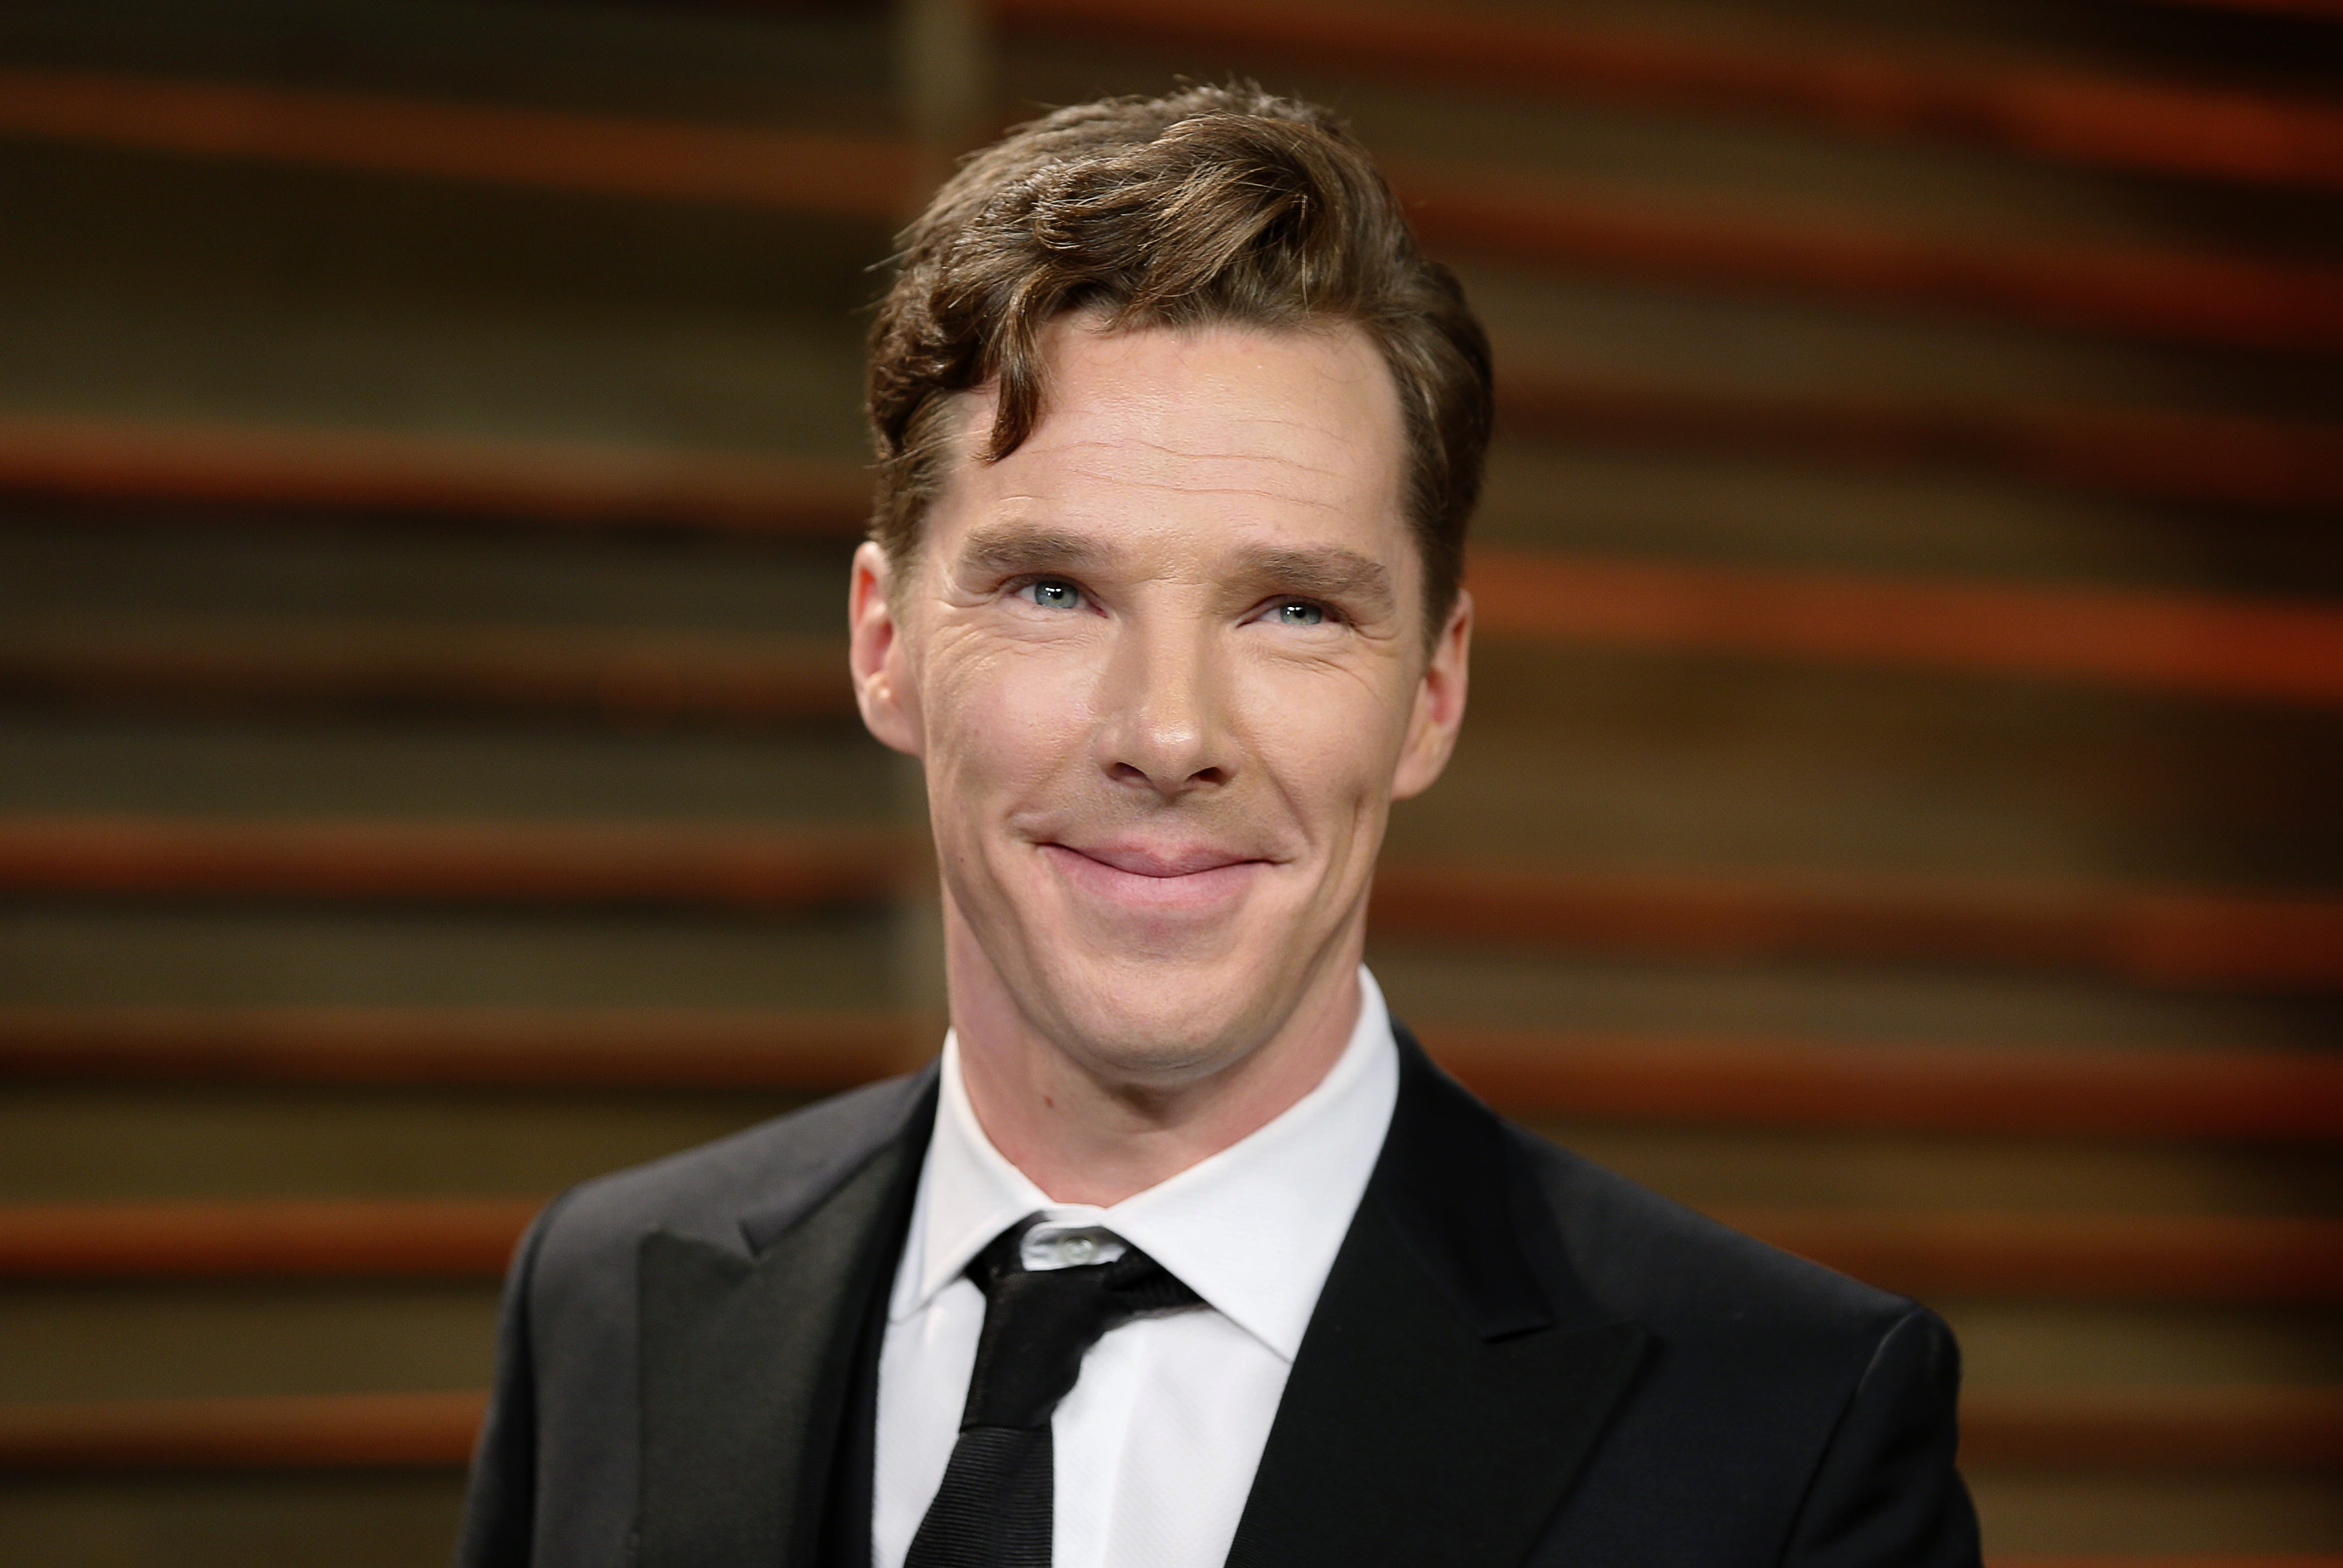 Benedict Cumberbatch arrives at the 2014 Vanity Fair Oscars Party in West Hollywood, on March 3, 2014. (Danny Moloshok—Reuters)